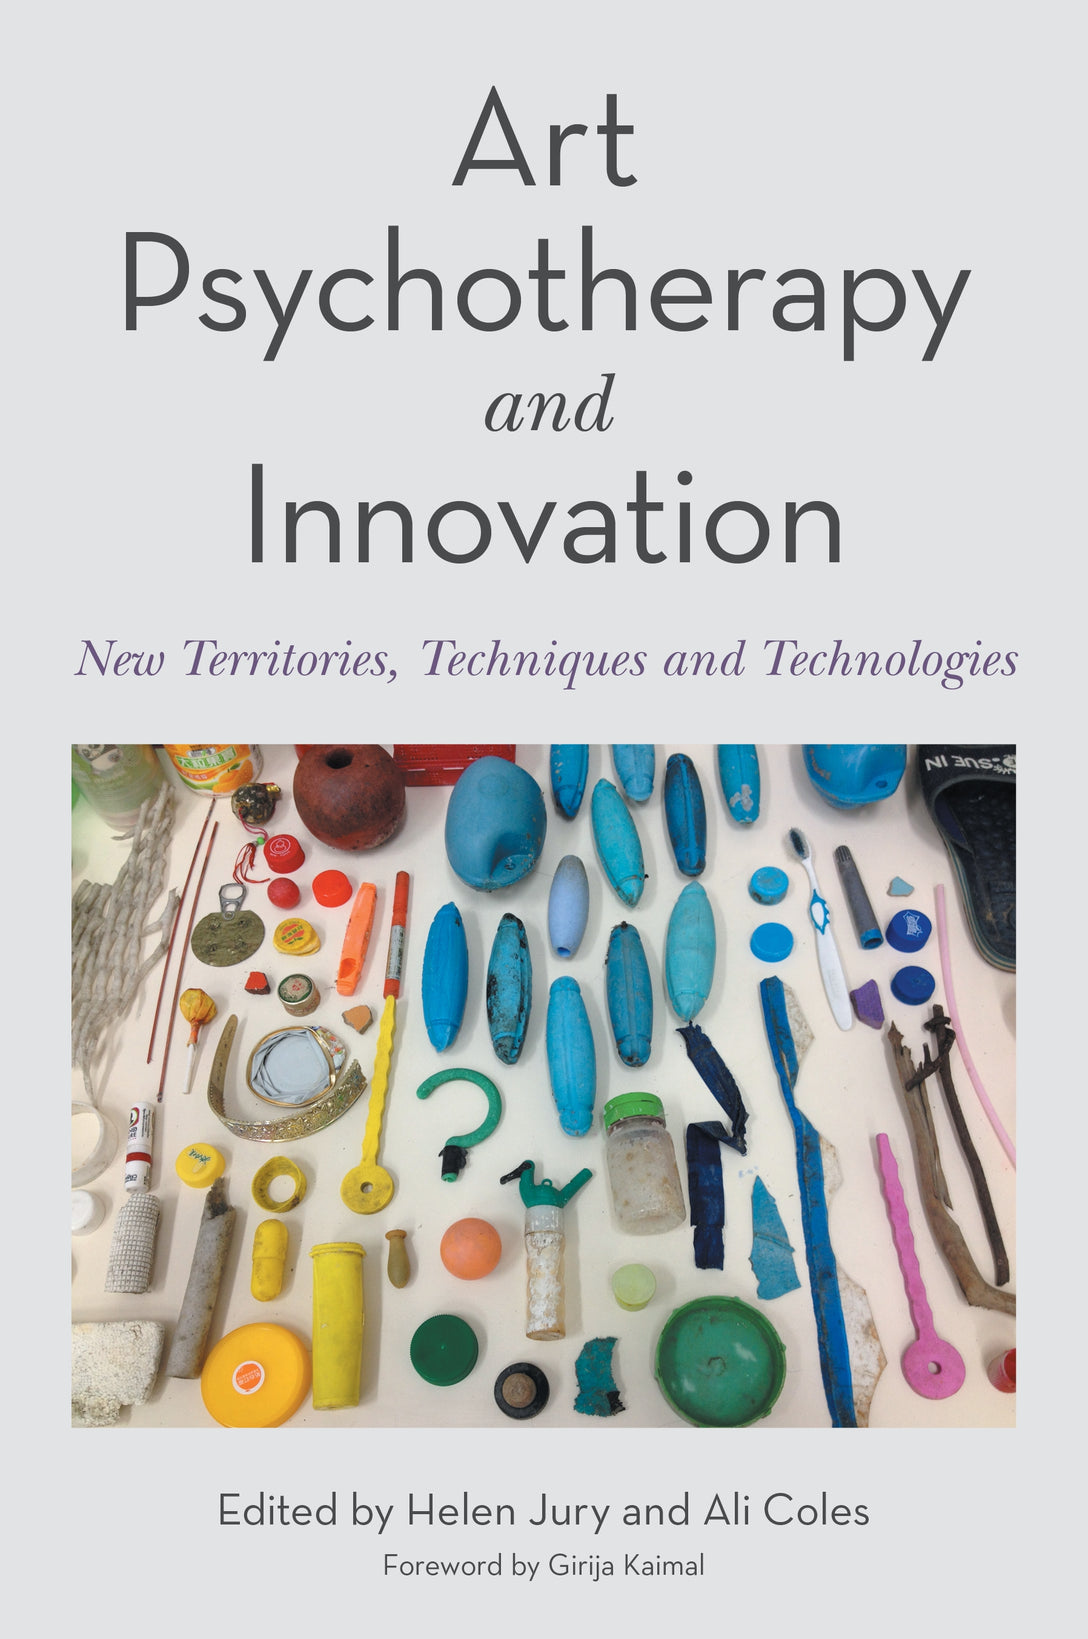 Art Psychotherapy and Innovation by Helen Jury, Ali Coles, Girija Kaimal, No Author Listed